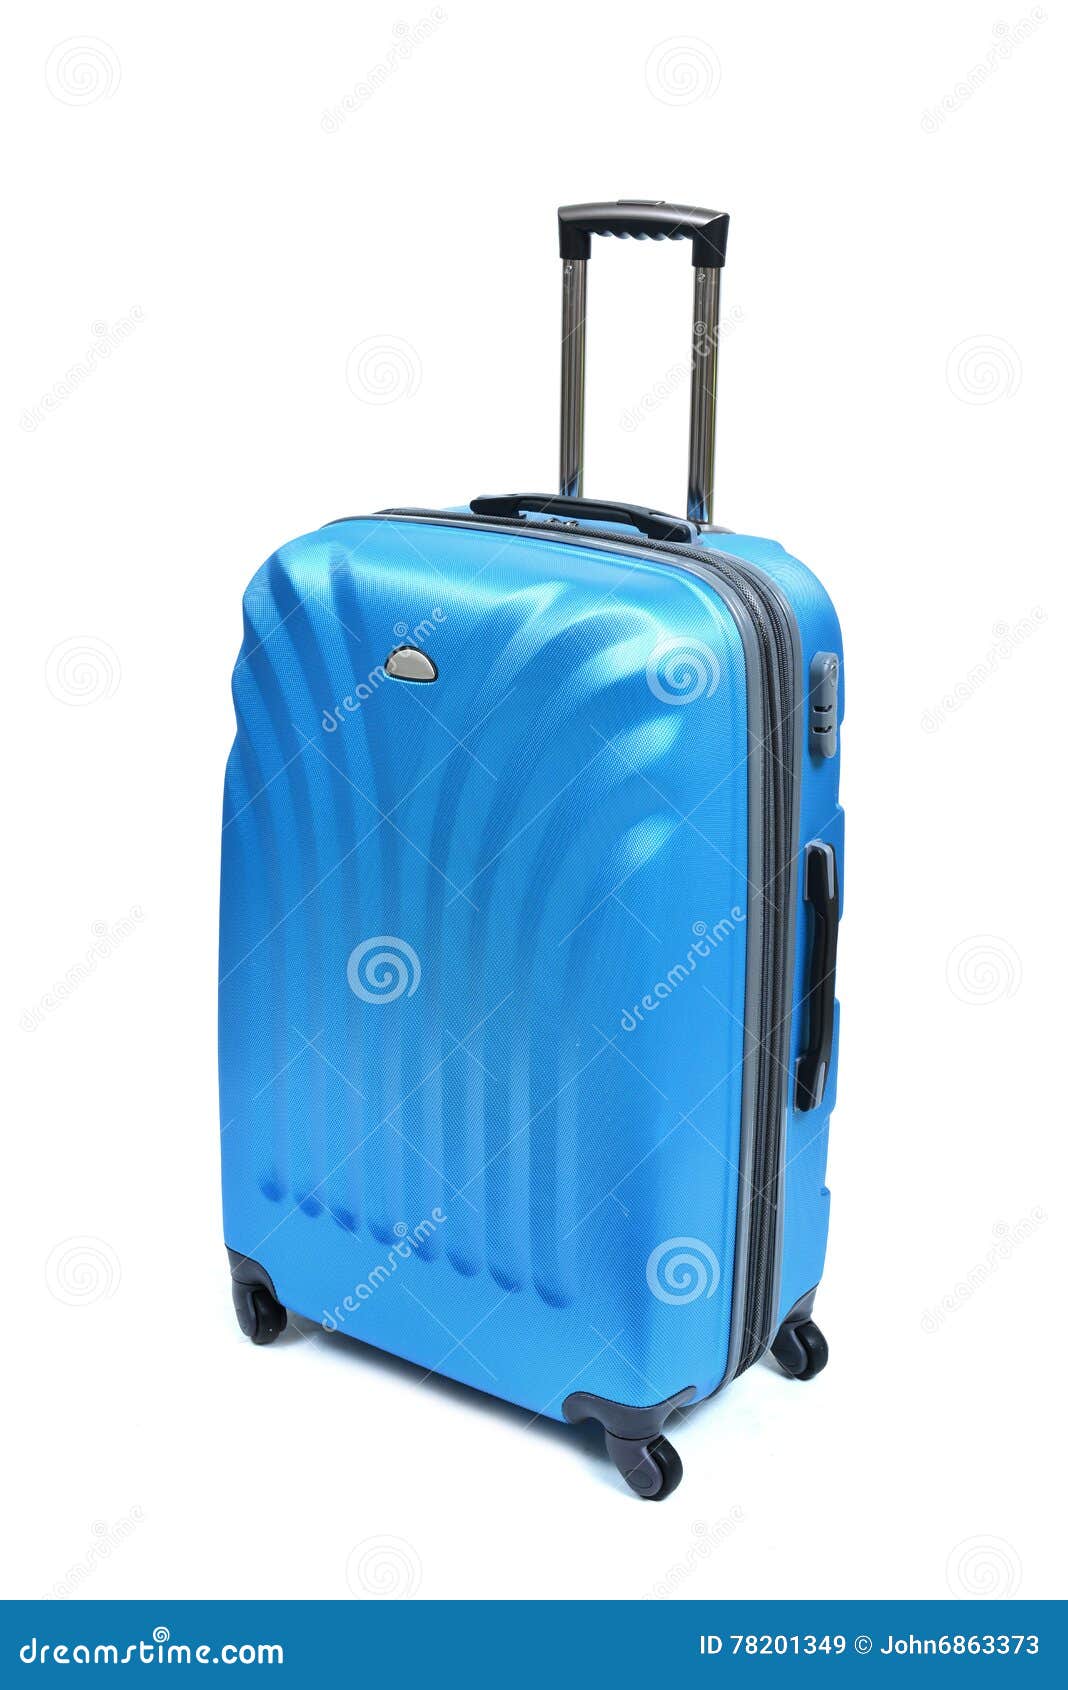 Blue suitcase stock image. Image of boarding, airport - 78201349